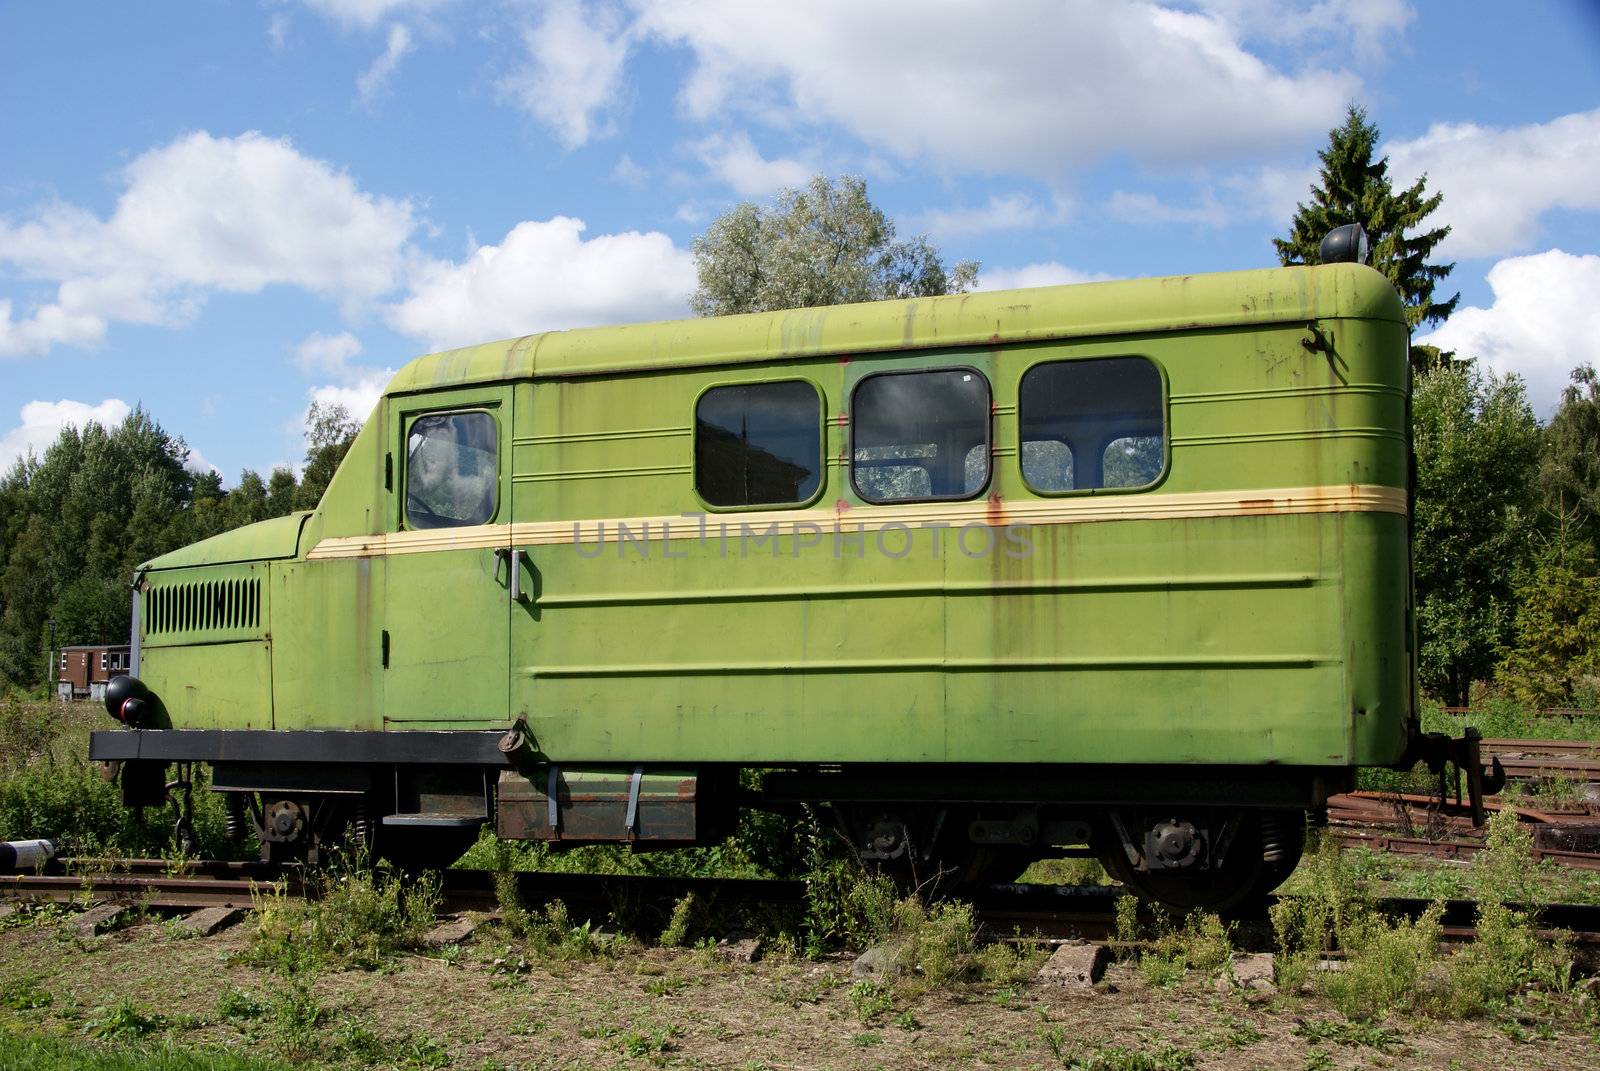 The railway car for transportation  of workers in career